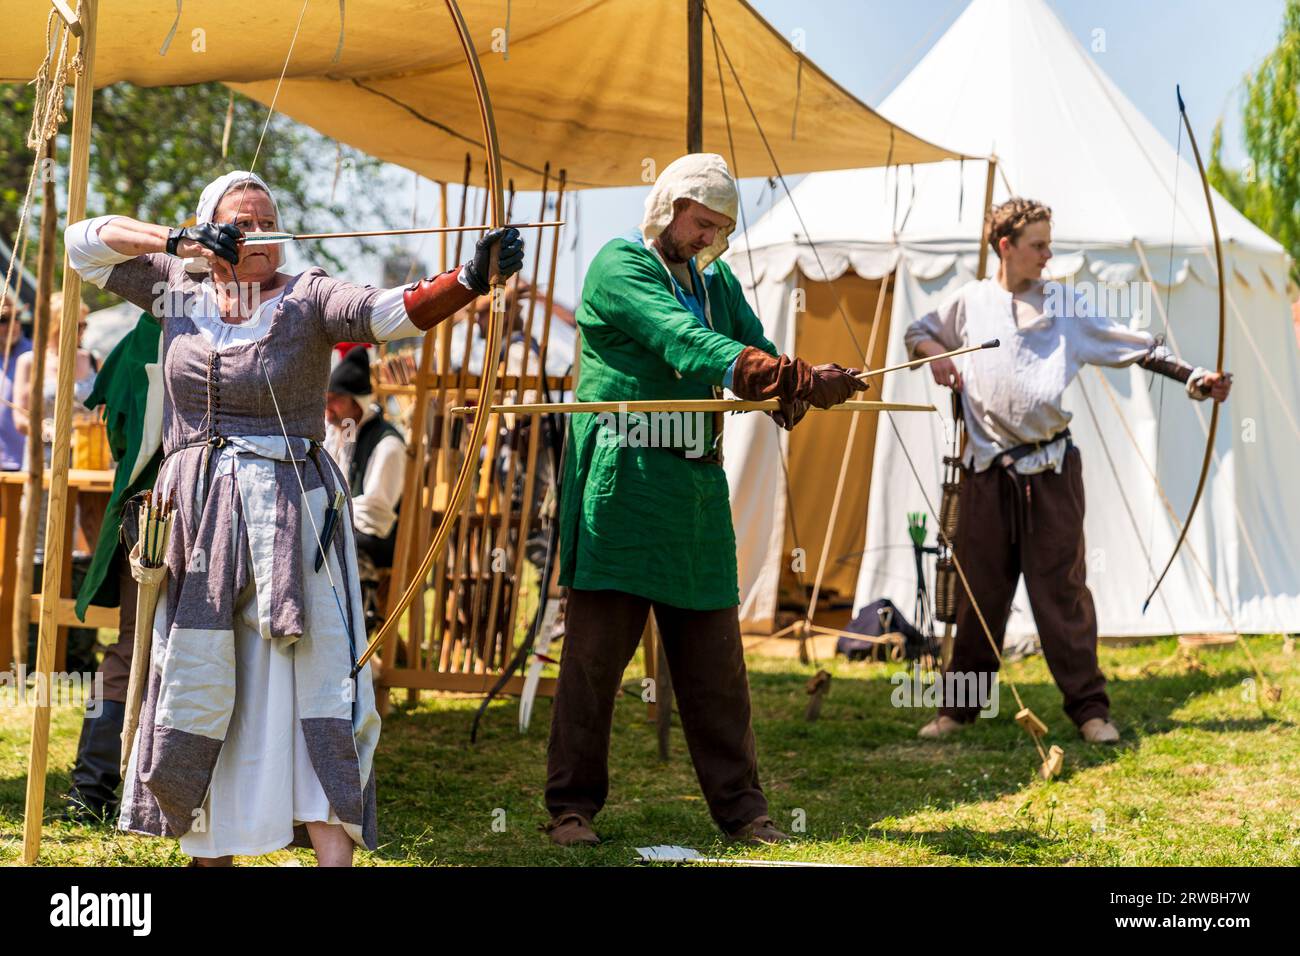 Medieval reenactment with a woman in period costume, aiming a bow and arrow, while two men behind her ready their bows. People watching in background. Stock Photo